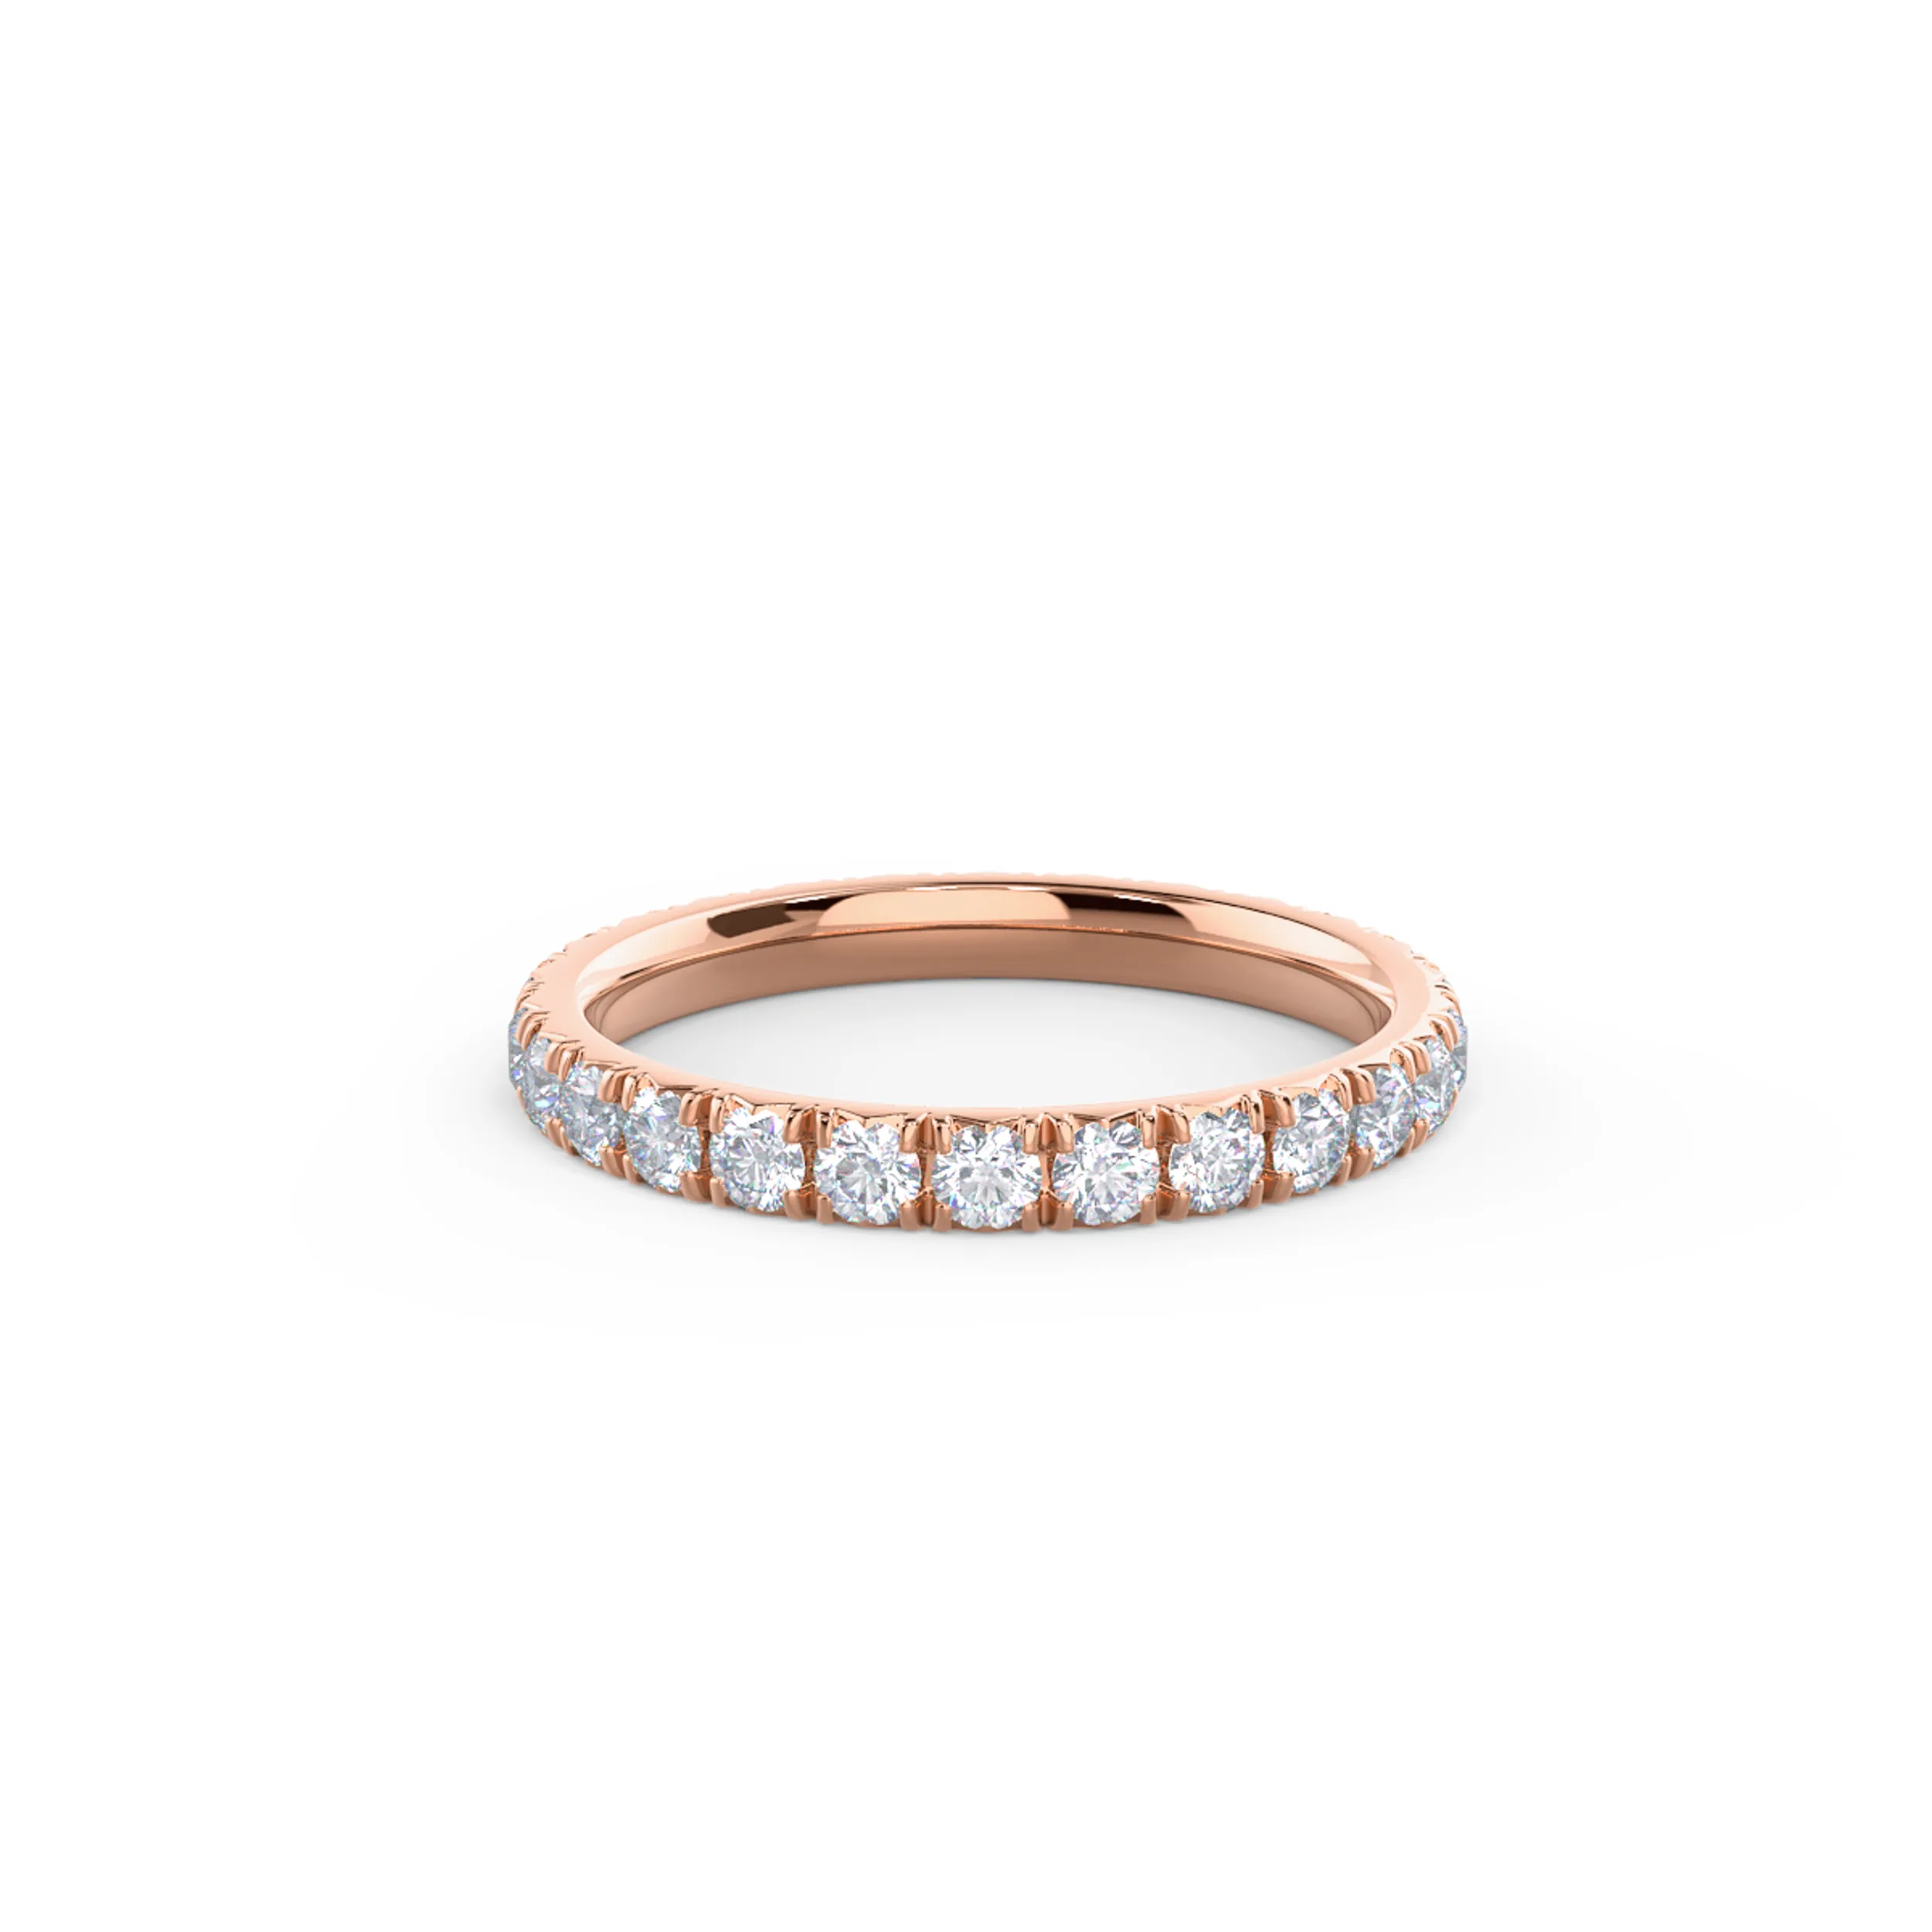 14kt Rose Gold French Pavé Eternity Band featuring High Quality 1.0 ct Round Lab Created Diamonds (Main View)